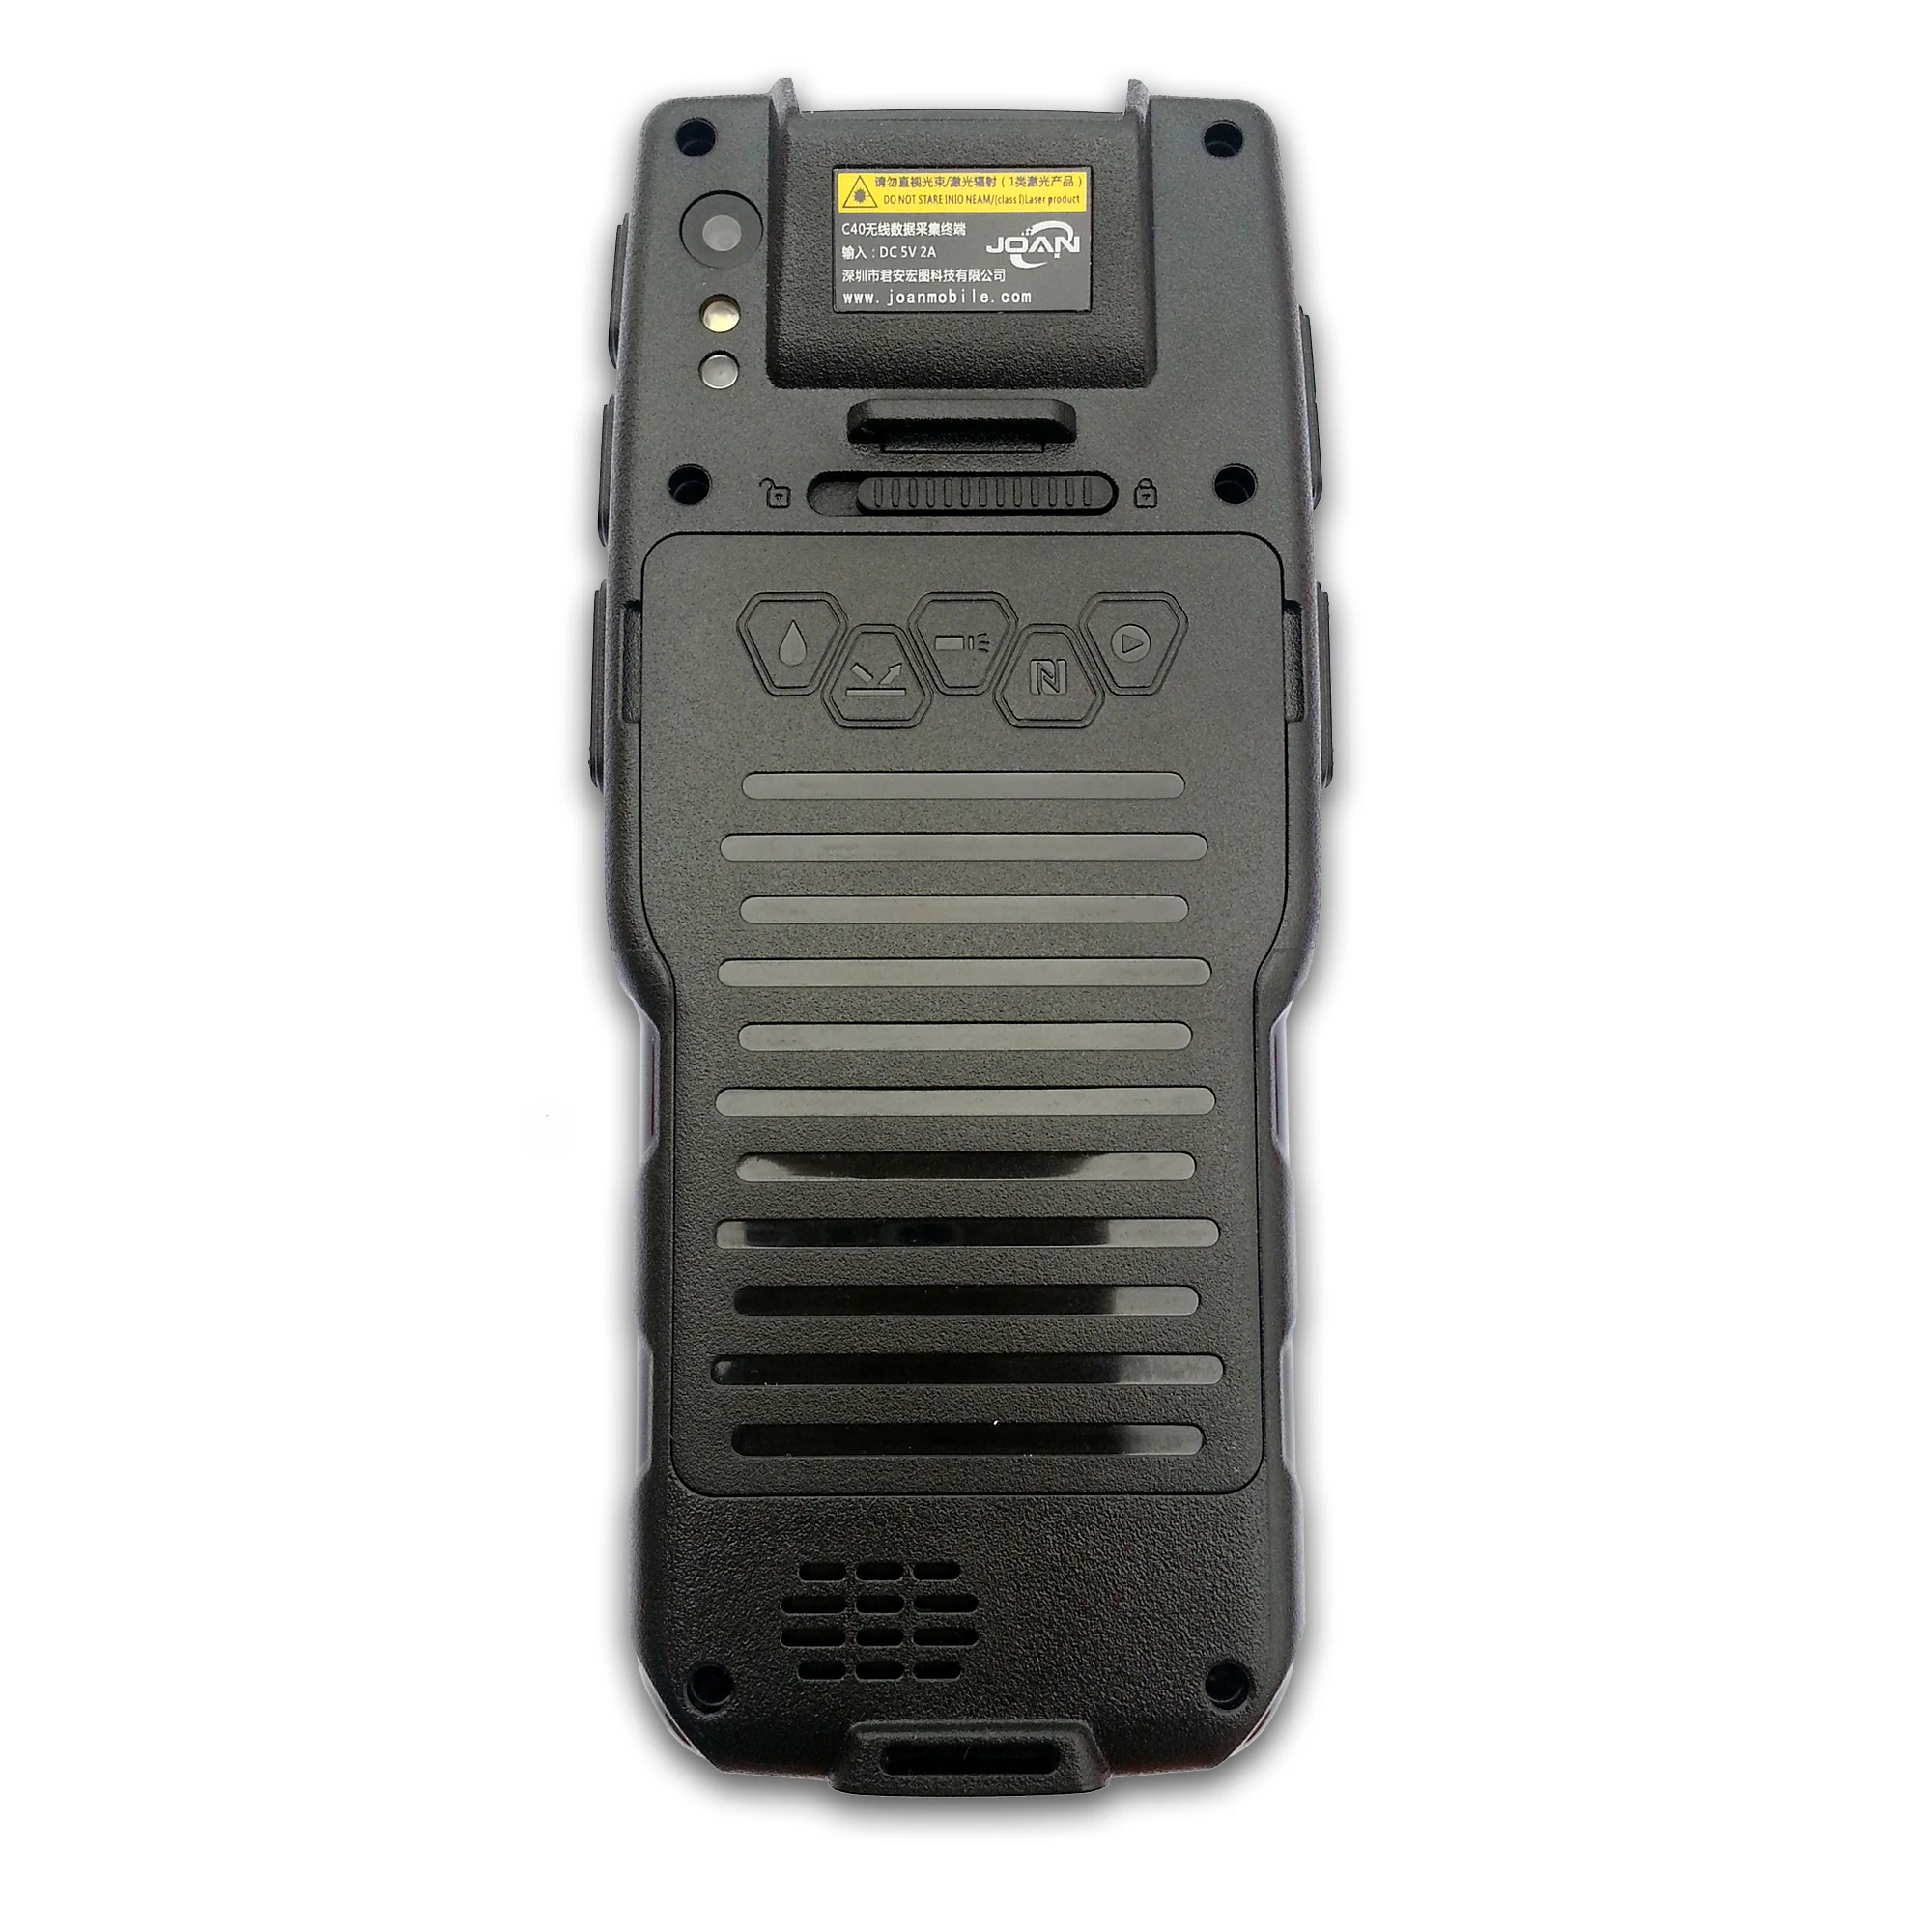 Factory Rugged Android Handheld Mobile Terminal Pda 1d 2d Qr Barcode Scanner With WiFi 4G Camera Keyboard Pdas